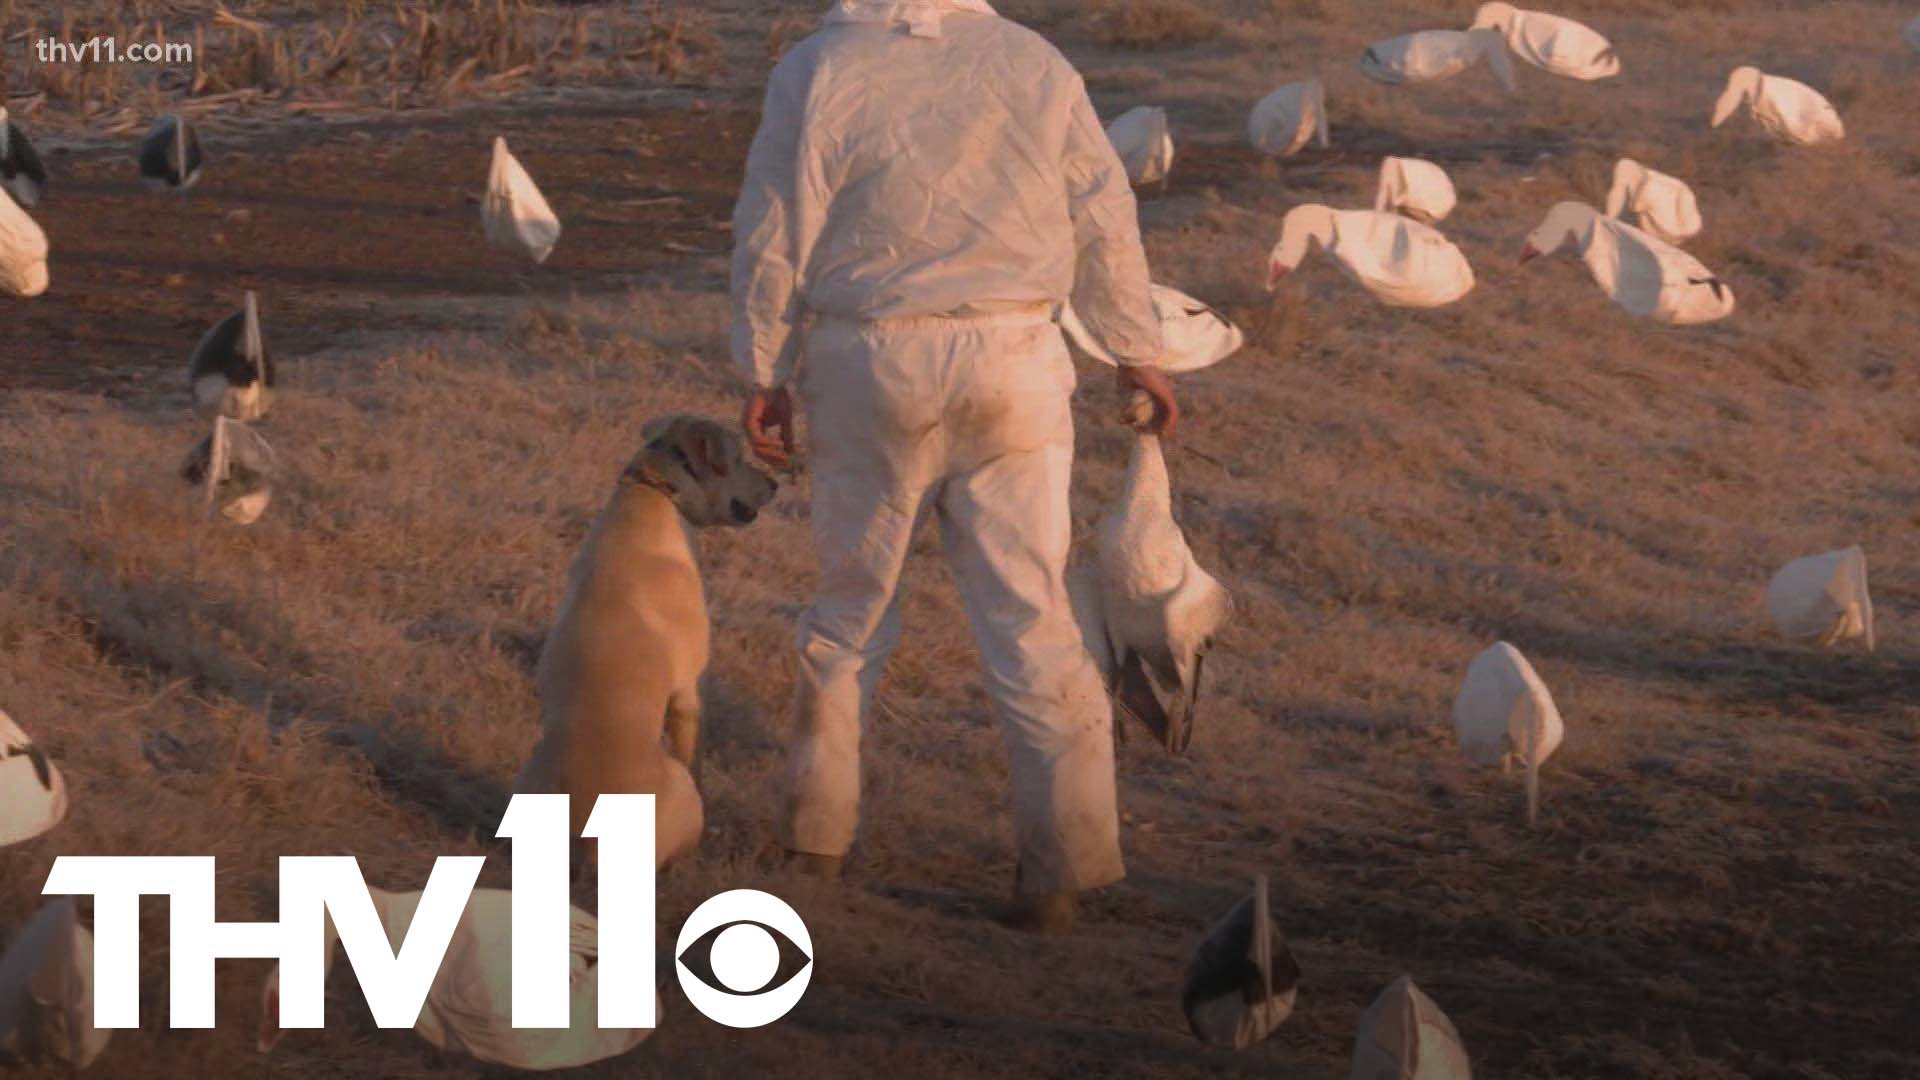 As more hunters head out for duck season, some are noticing sick waterfowl.